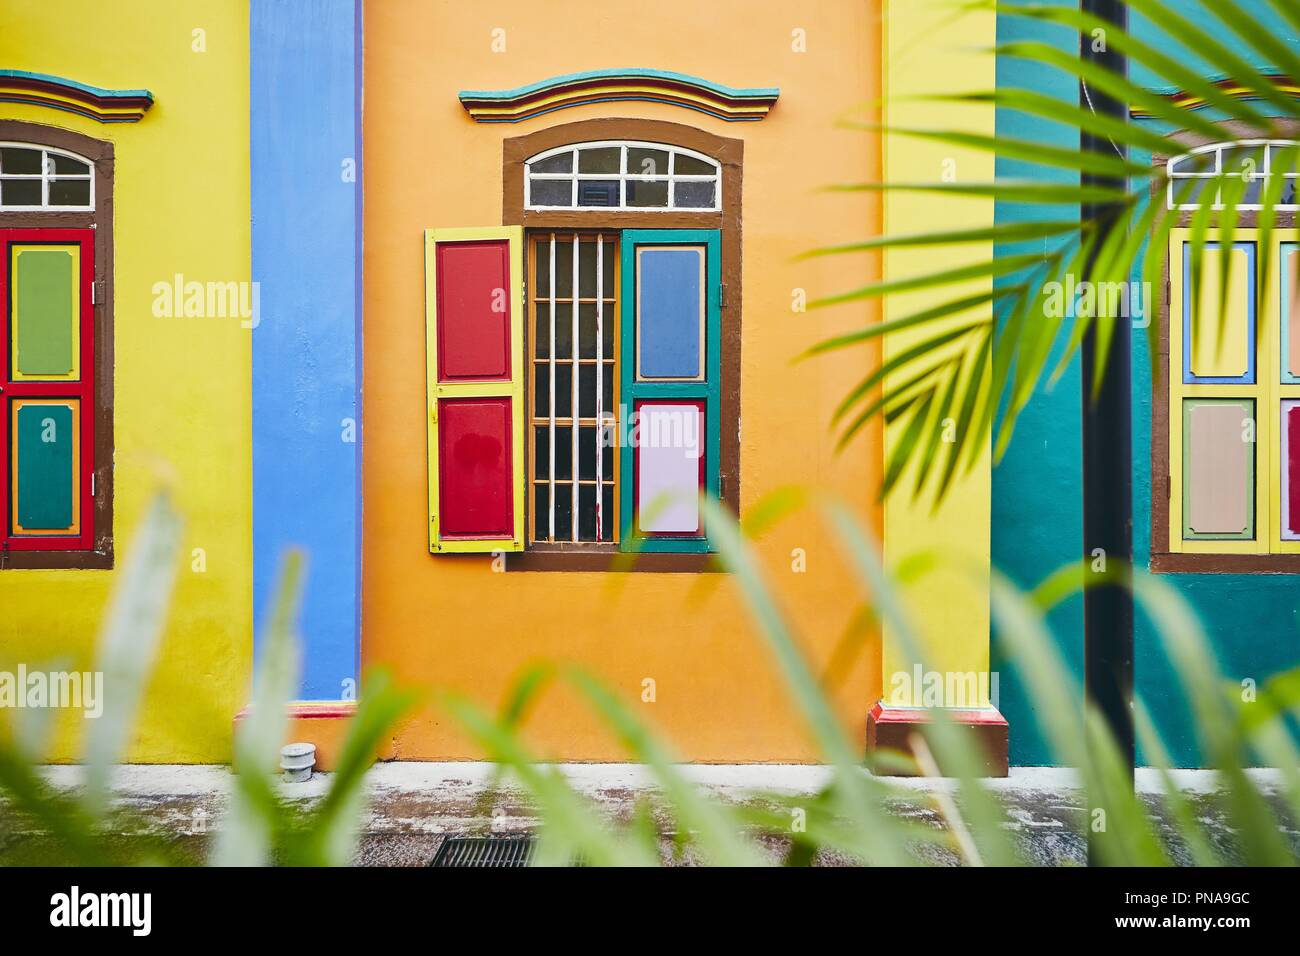 Colorful architectural detail of the historical building in the Little India district, Singapore Stock Photo